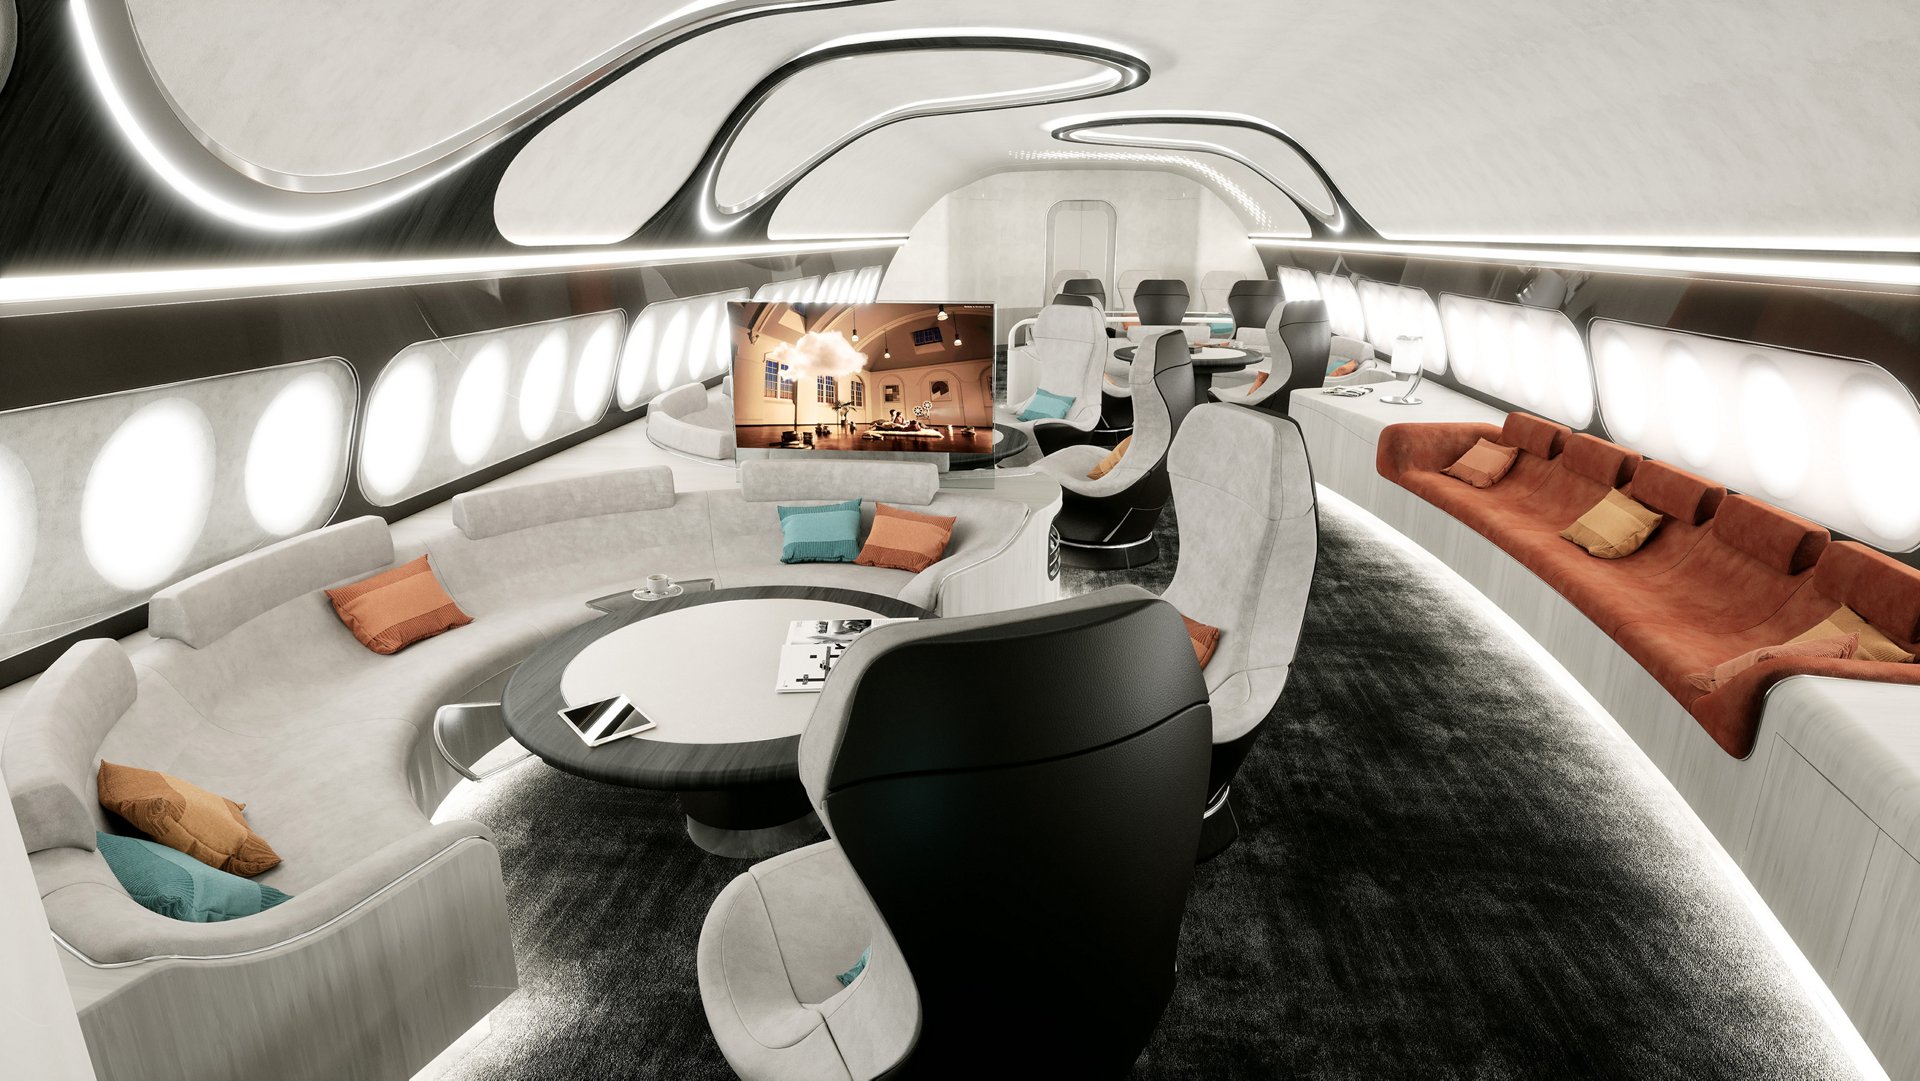 ACJ-Harmony-cabin-concept-Lounge-overview.jpg